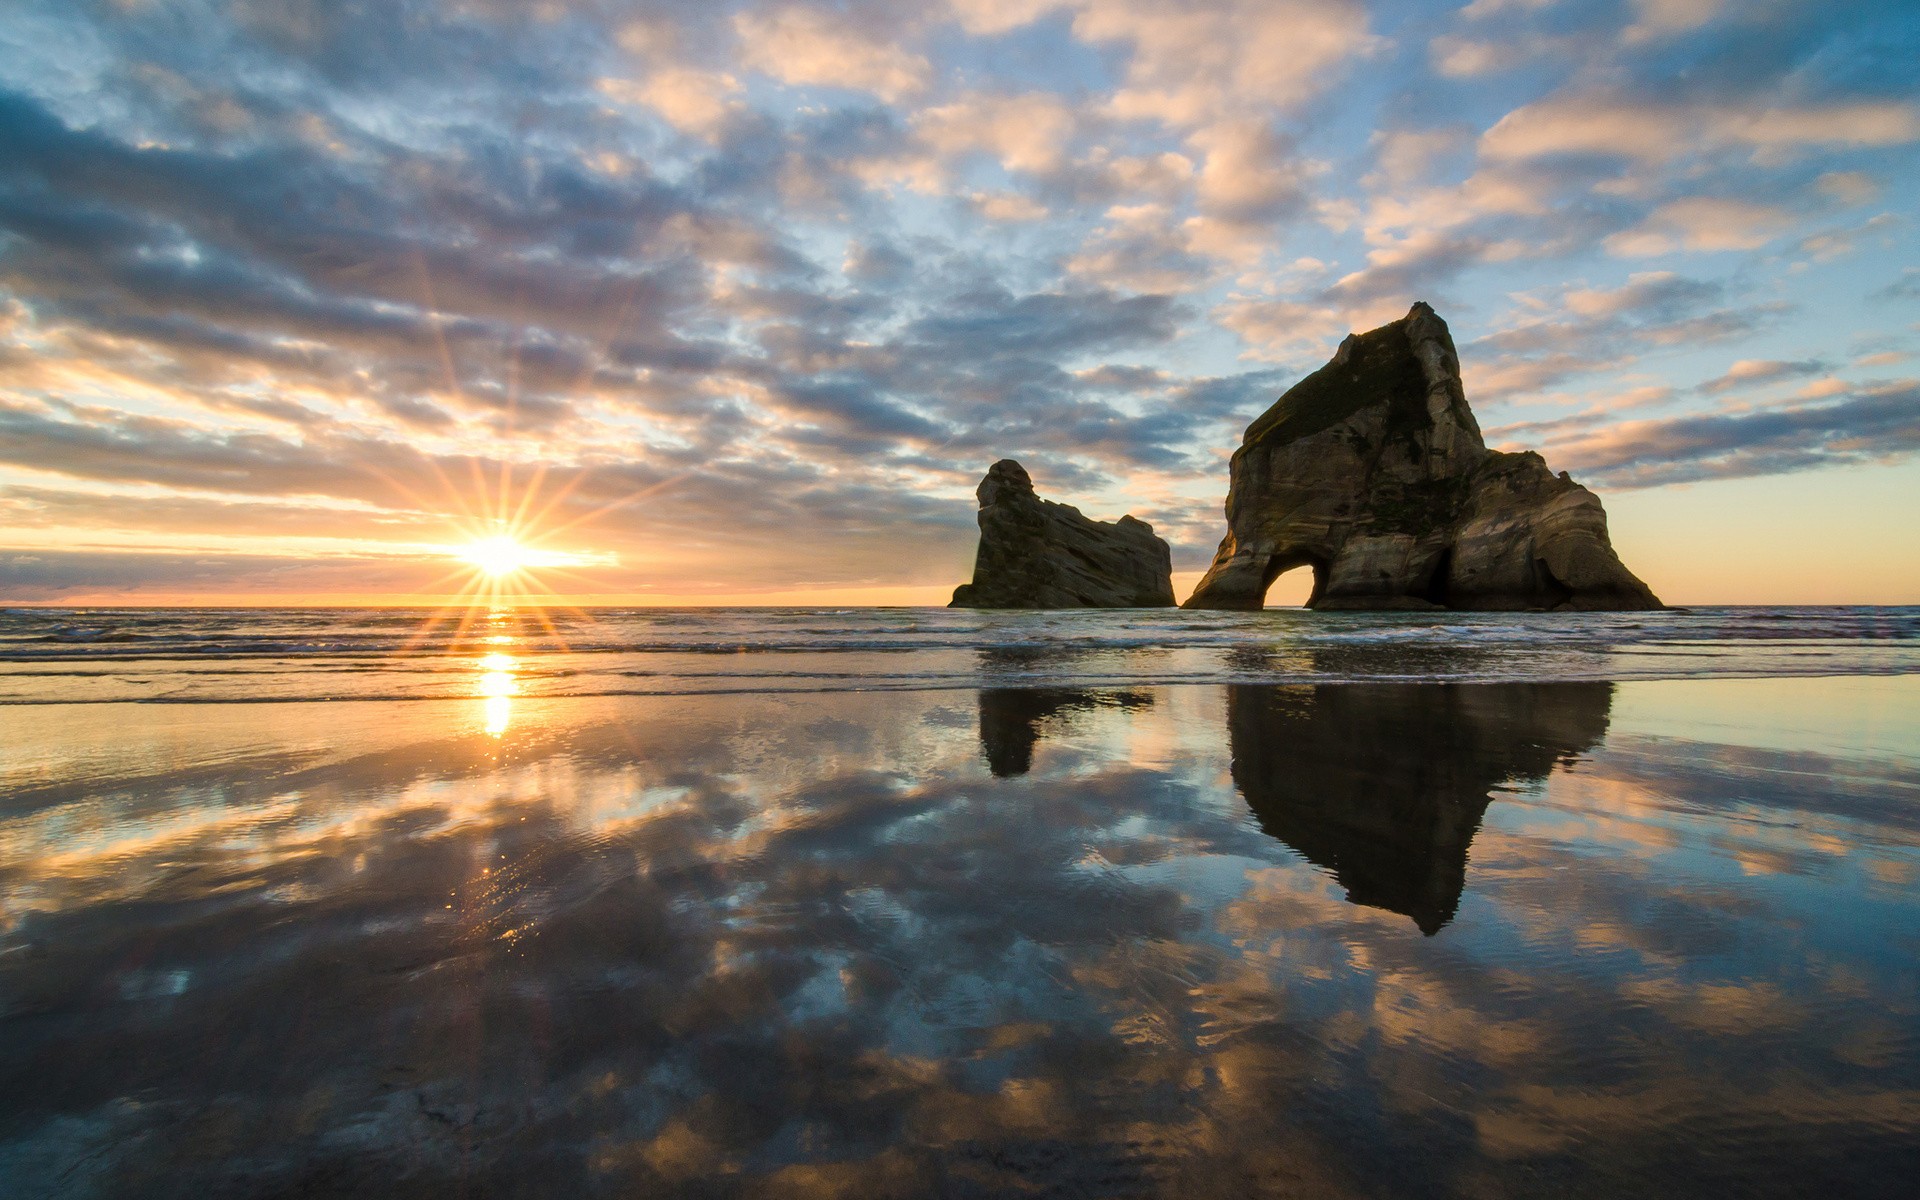 General 1920x1200 nature landscape lens flare sunset clouds reflection water rocks rock formation waves beach coast New Zealand